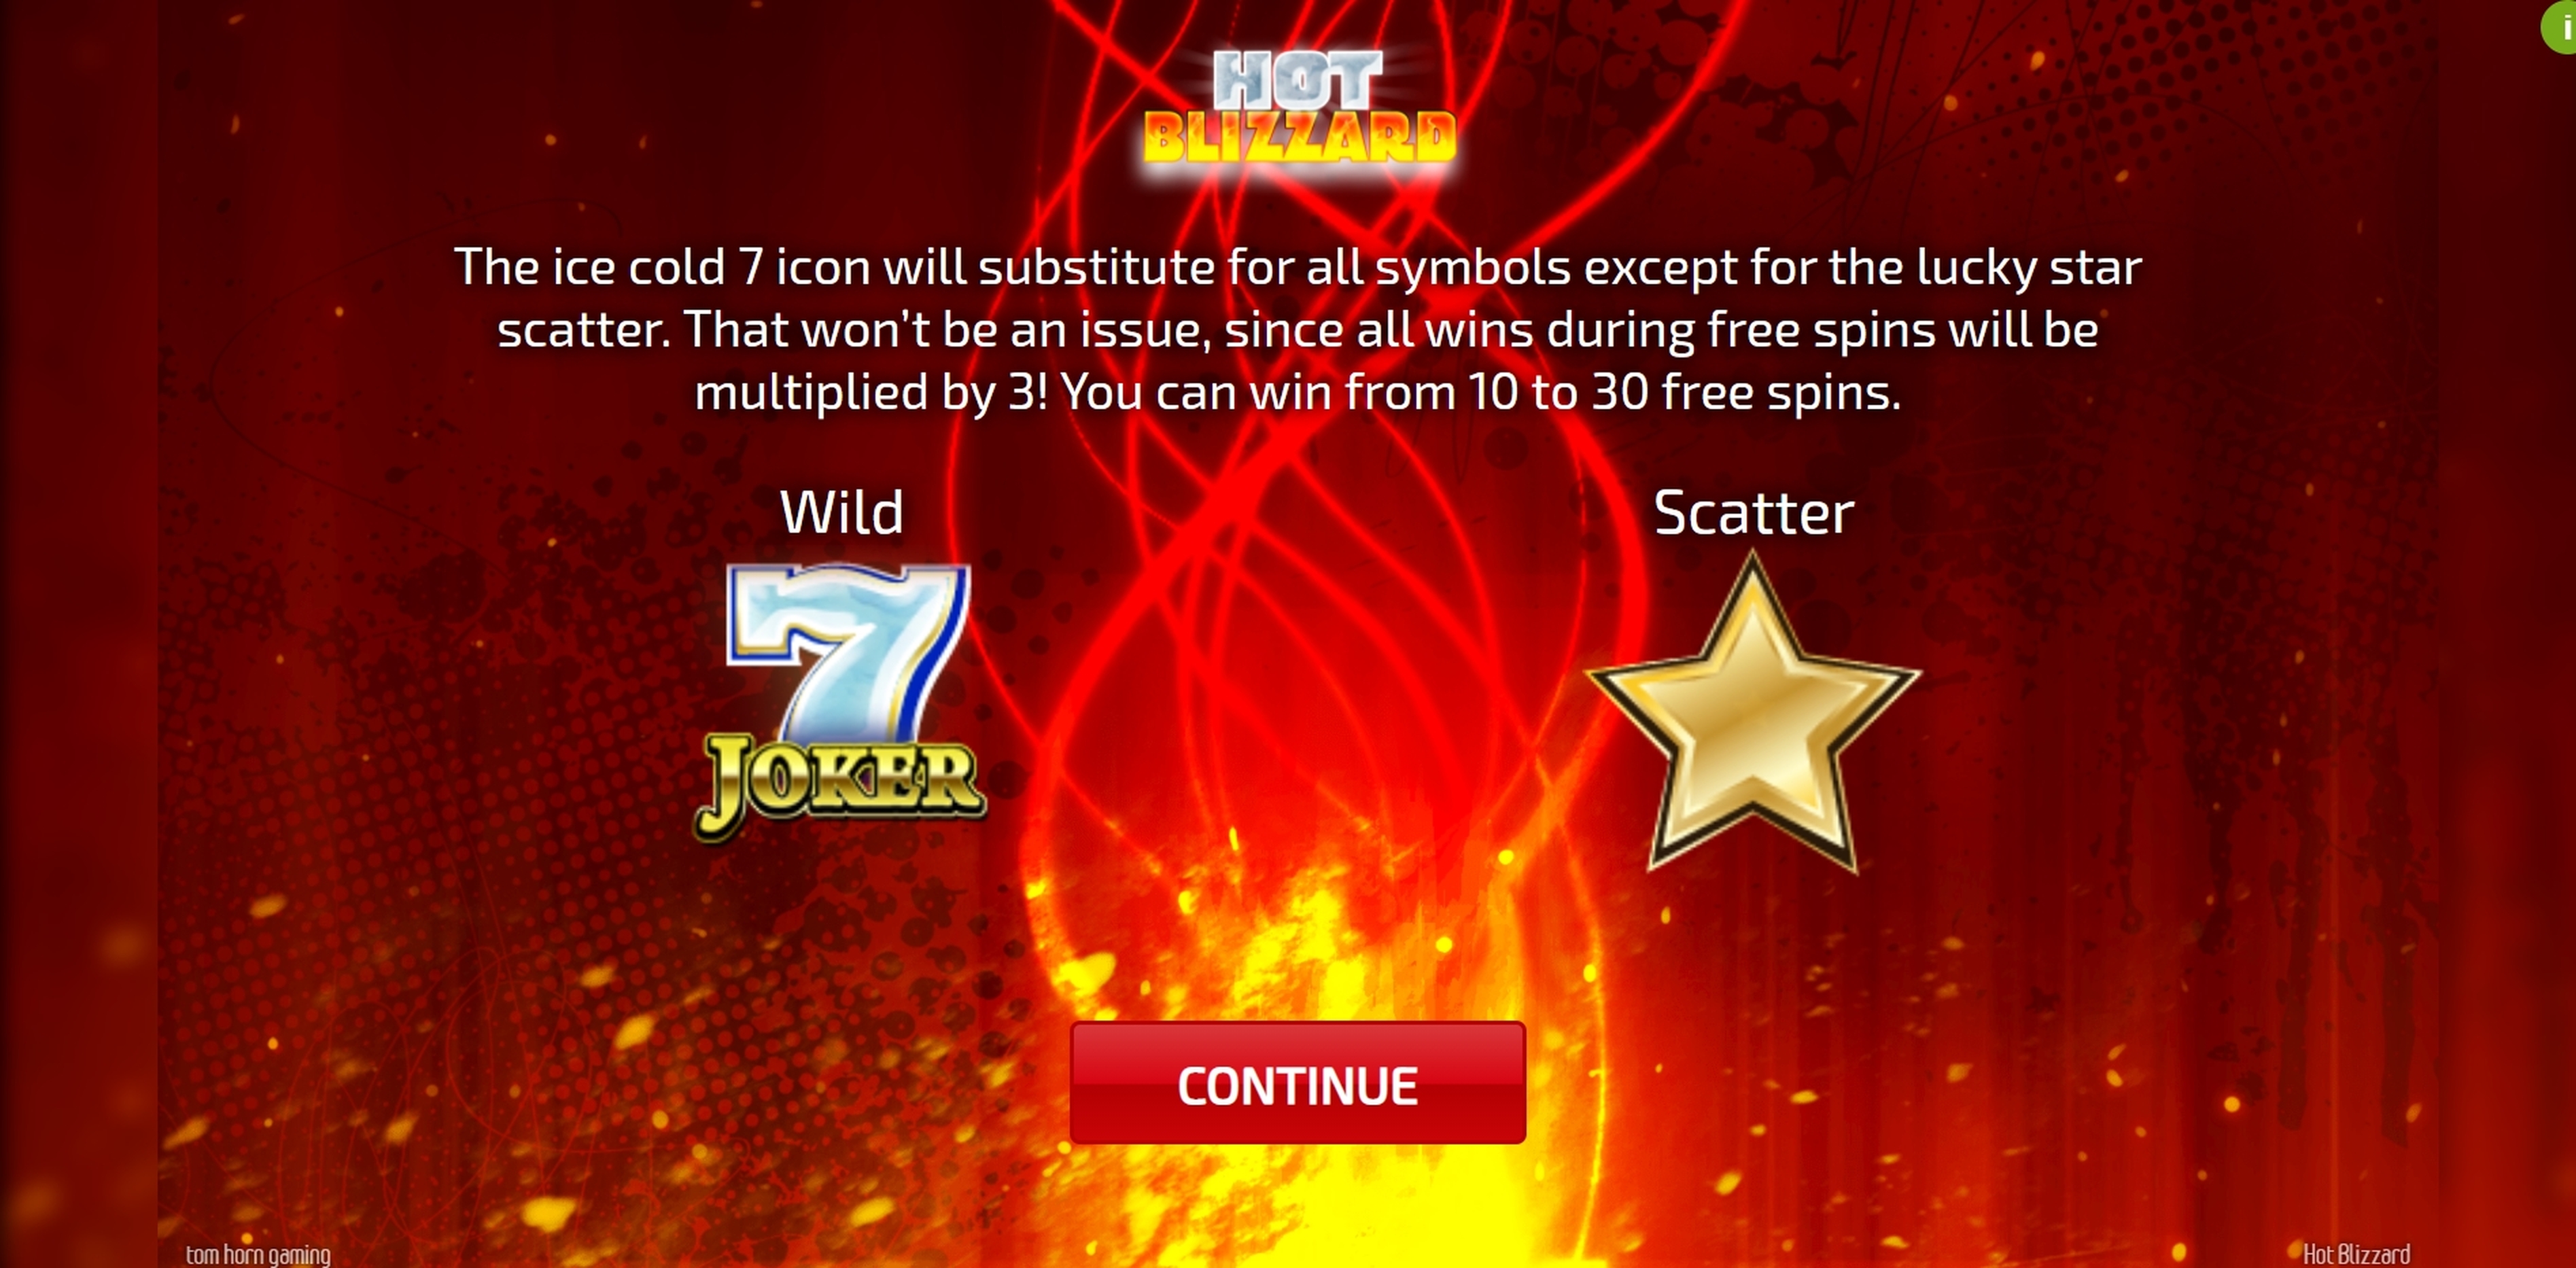 Play Hot Blizzard Free Casino Slot Game by Tom Horn Gaming